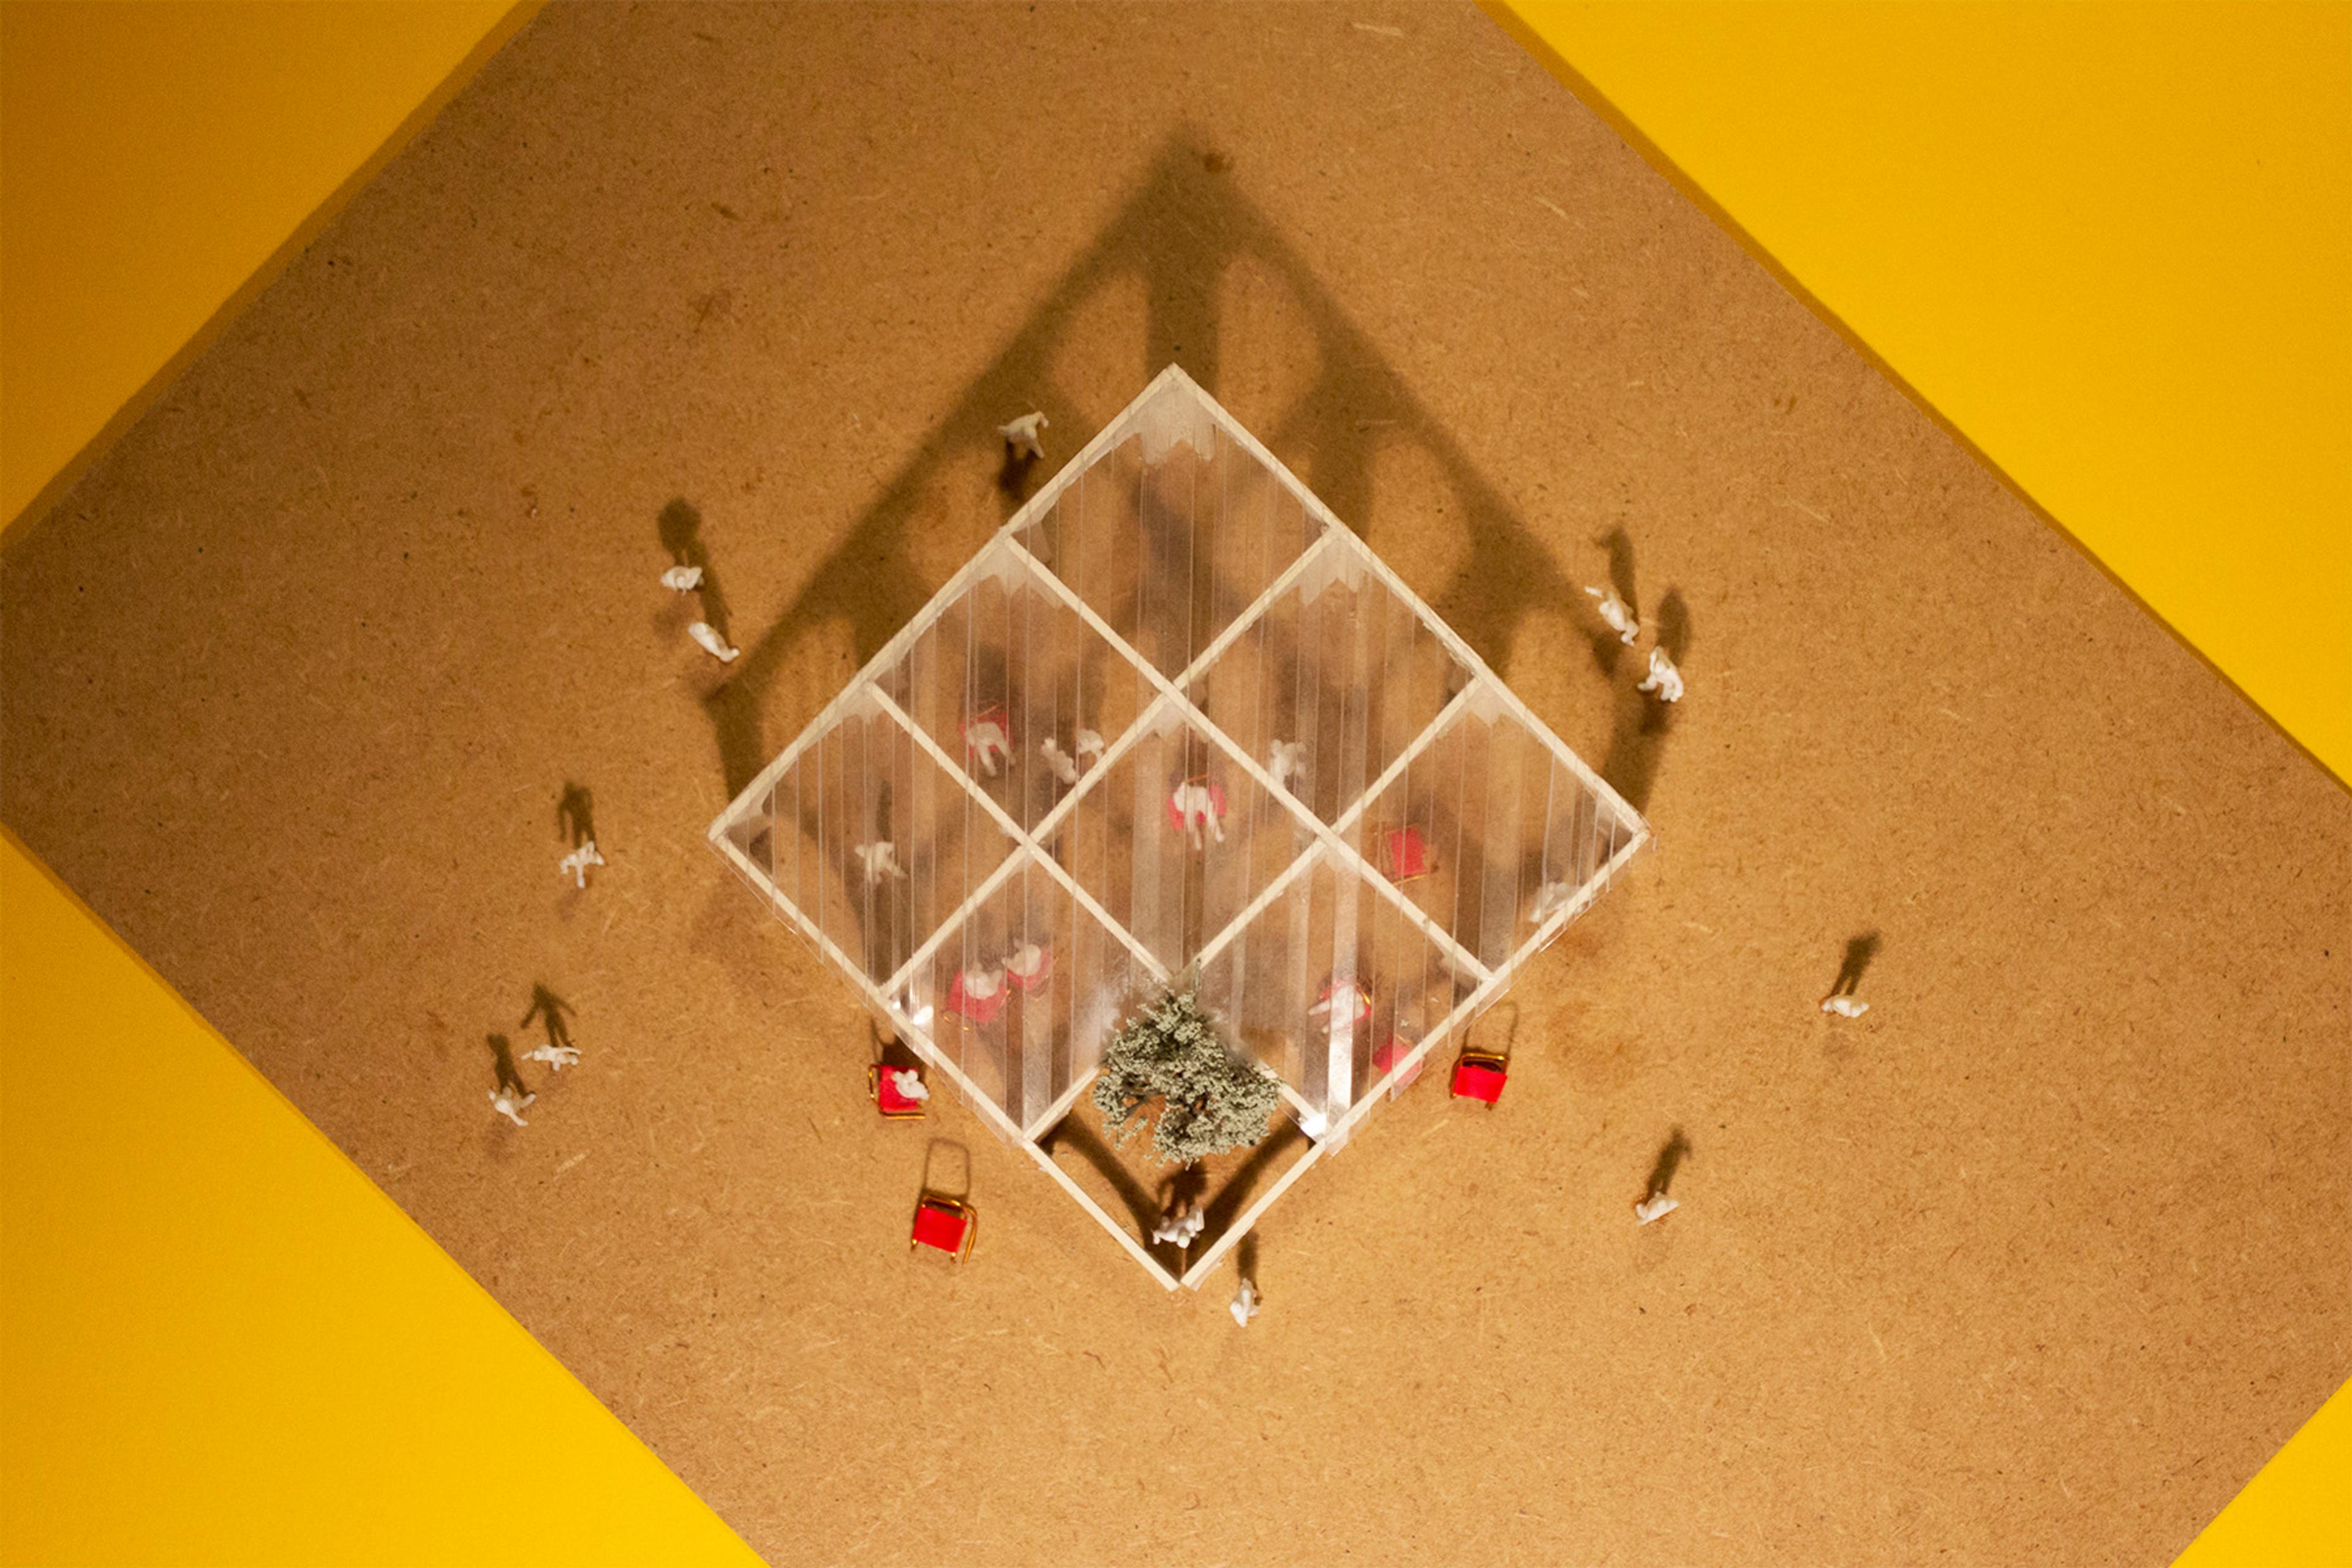 Architectural model of pavilion with chairs and people with a yellow background top down view